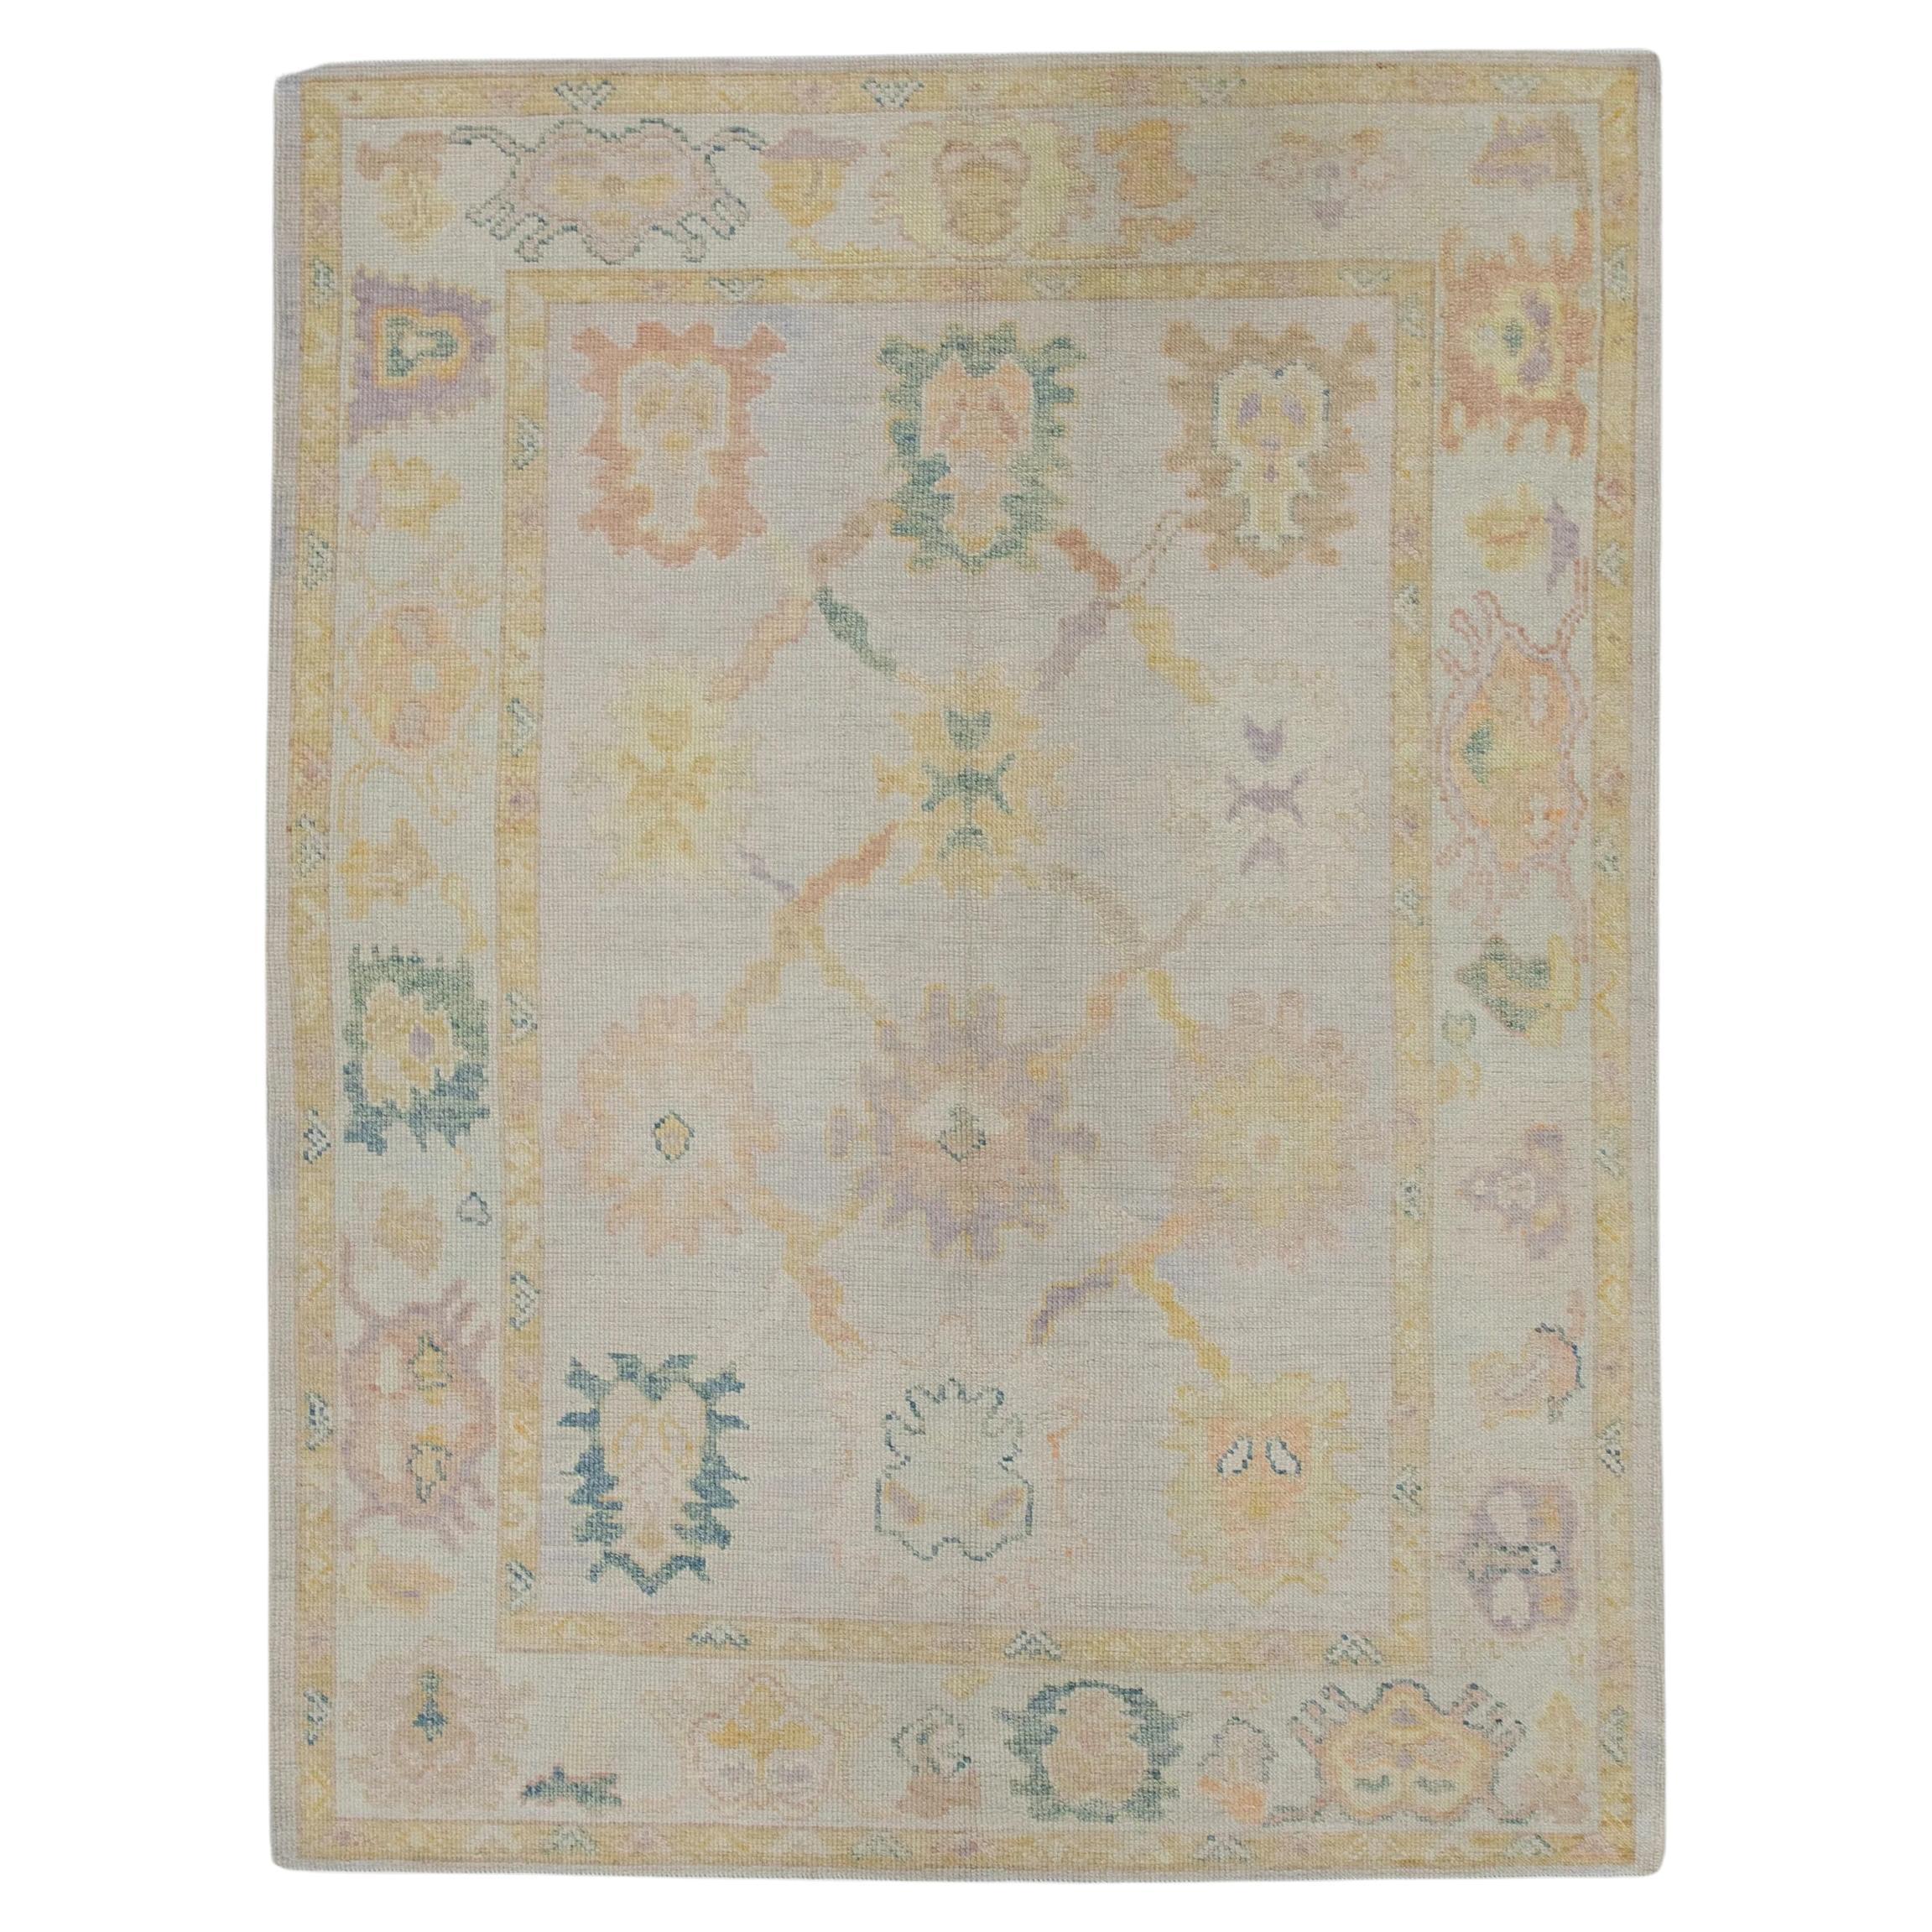 Colorful Pink Floral Handwoven Wool Turkish Oushak Rug 5'1" x 7' For Sale